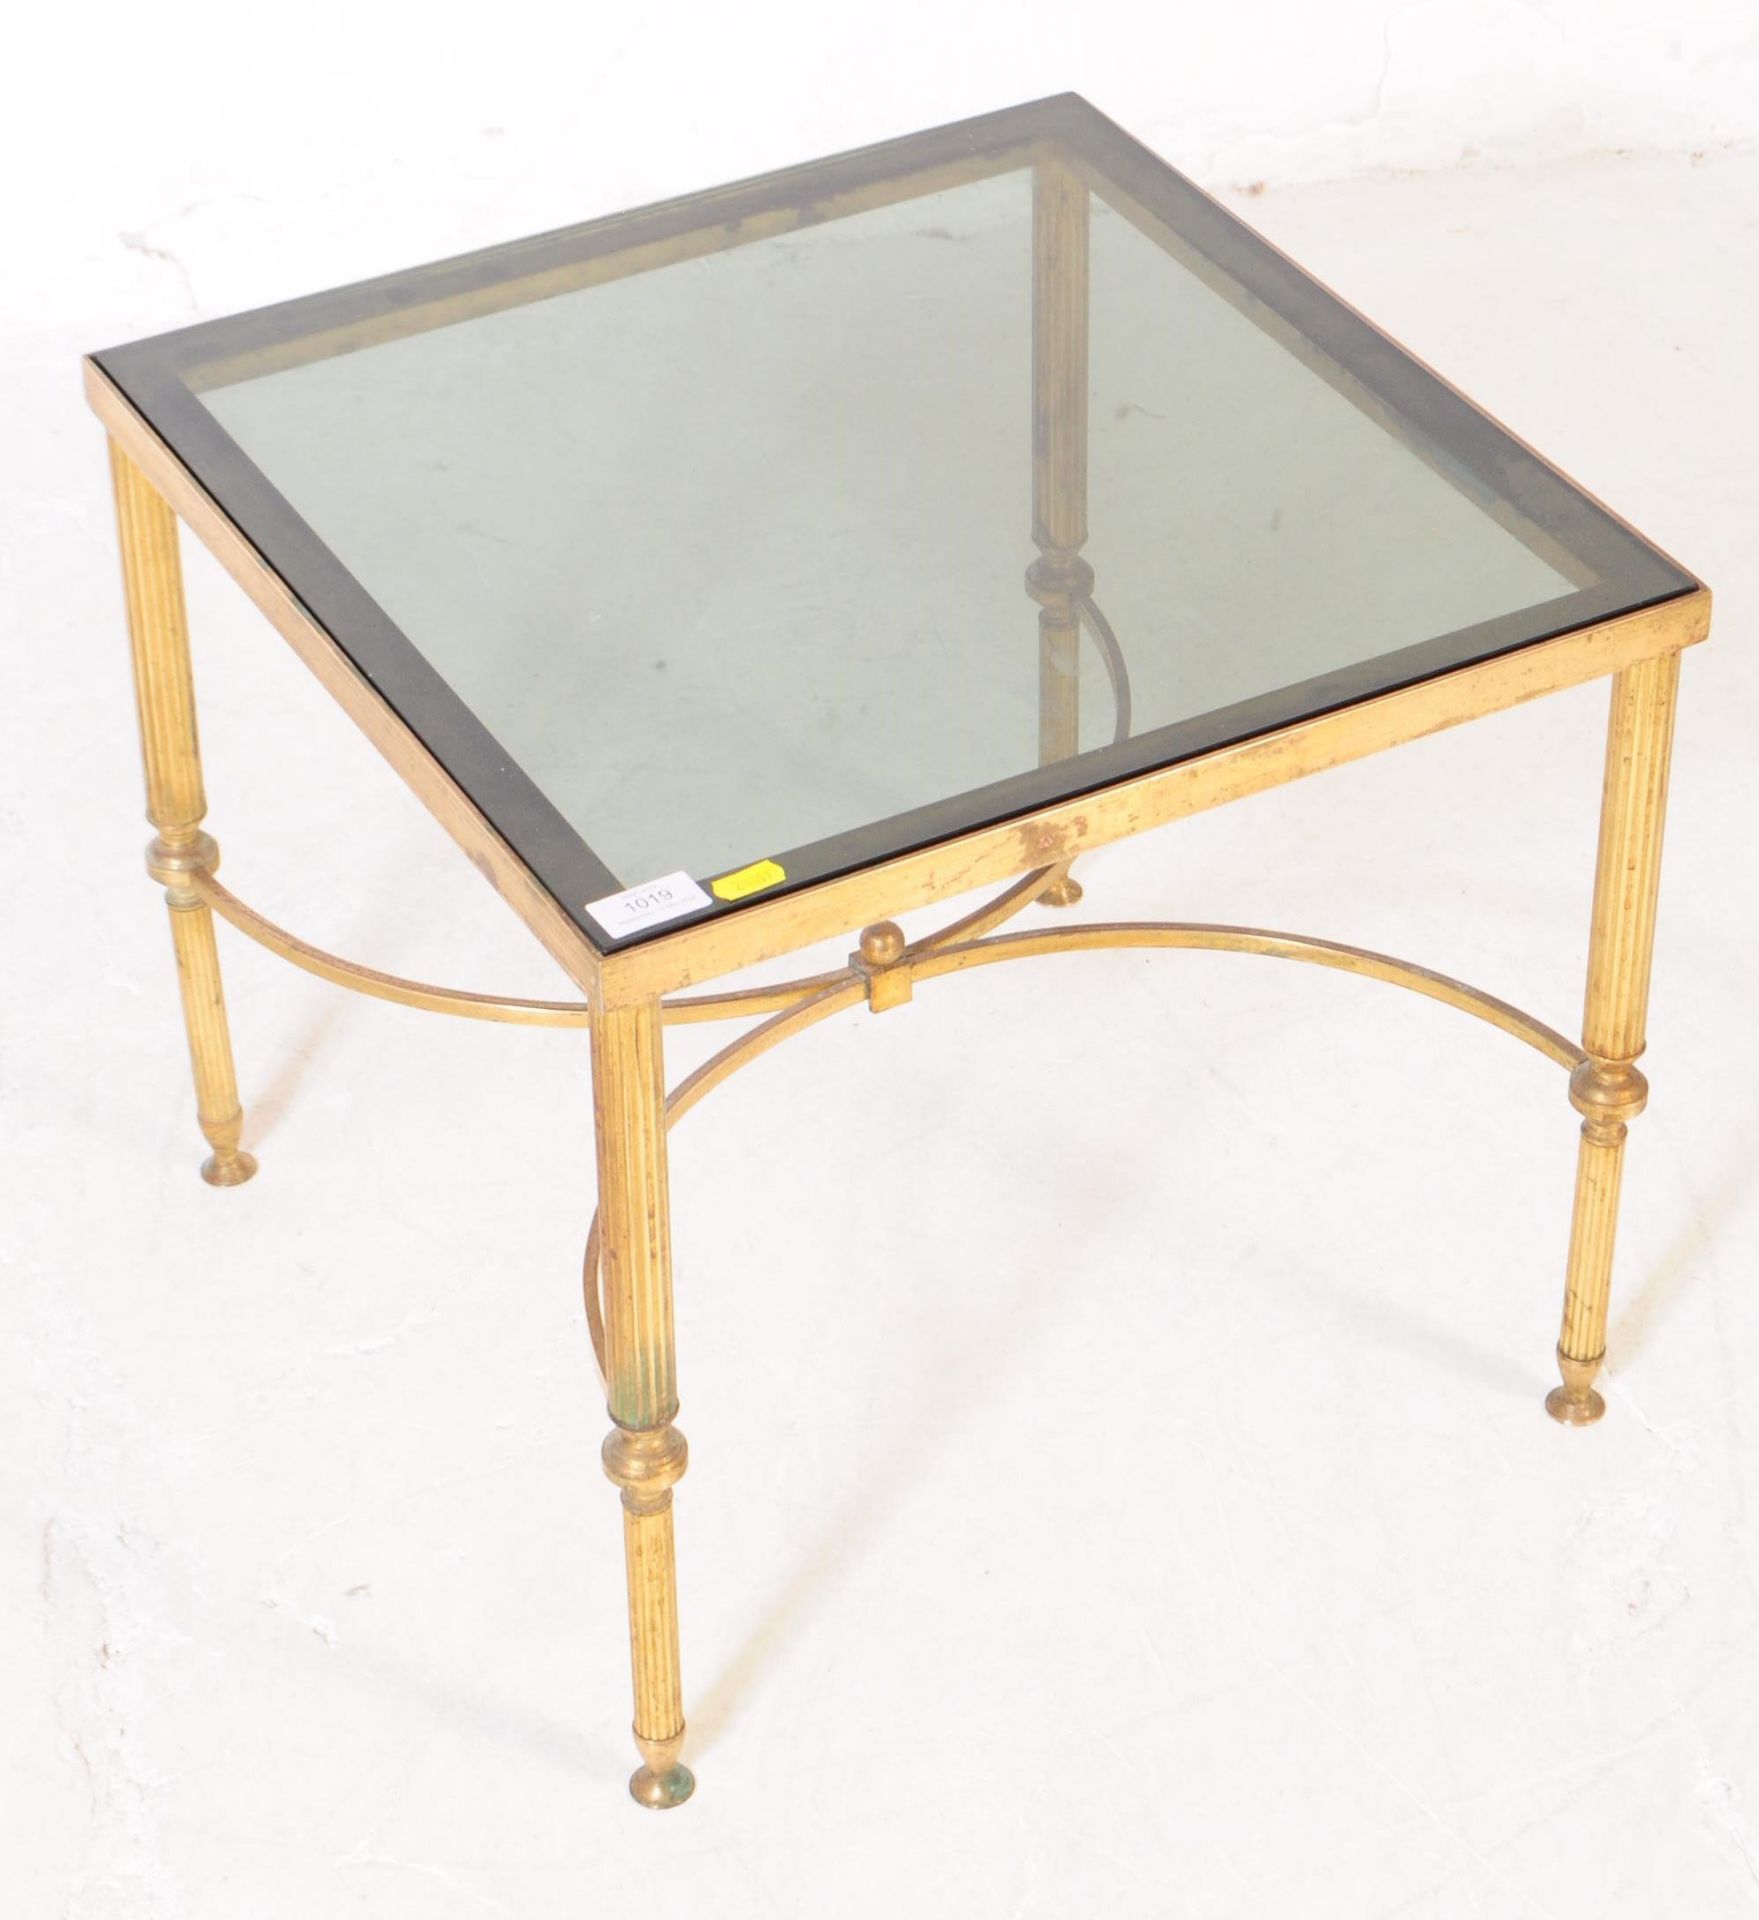 HOLLYWOOD REGENCY MANNER BRASS COFFEE TABLE - Image 2 of 4